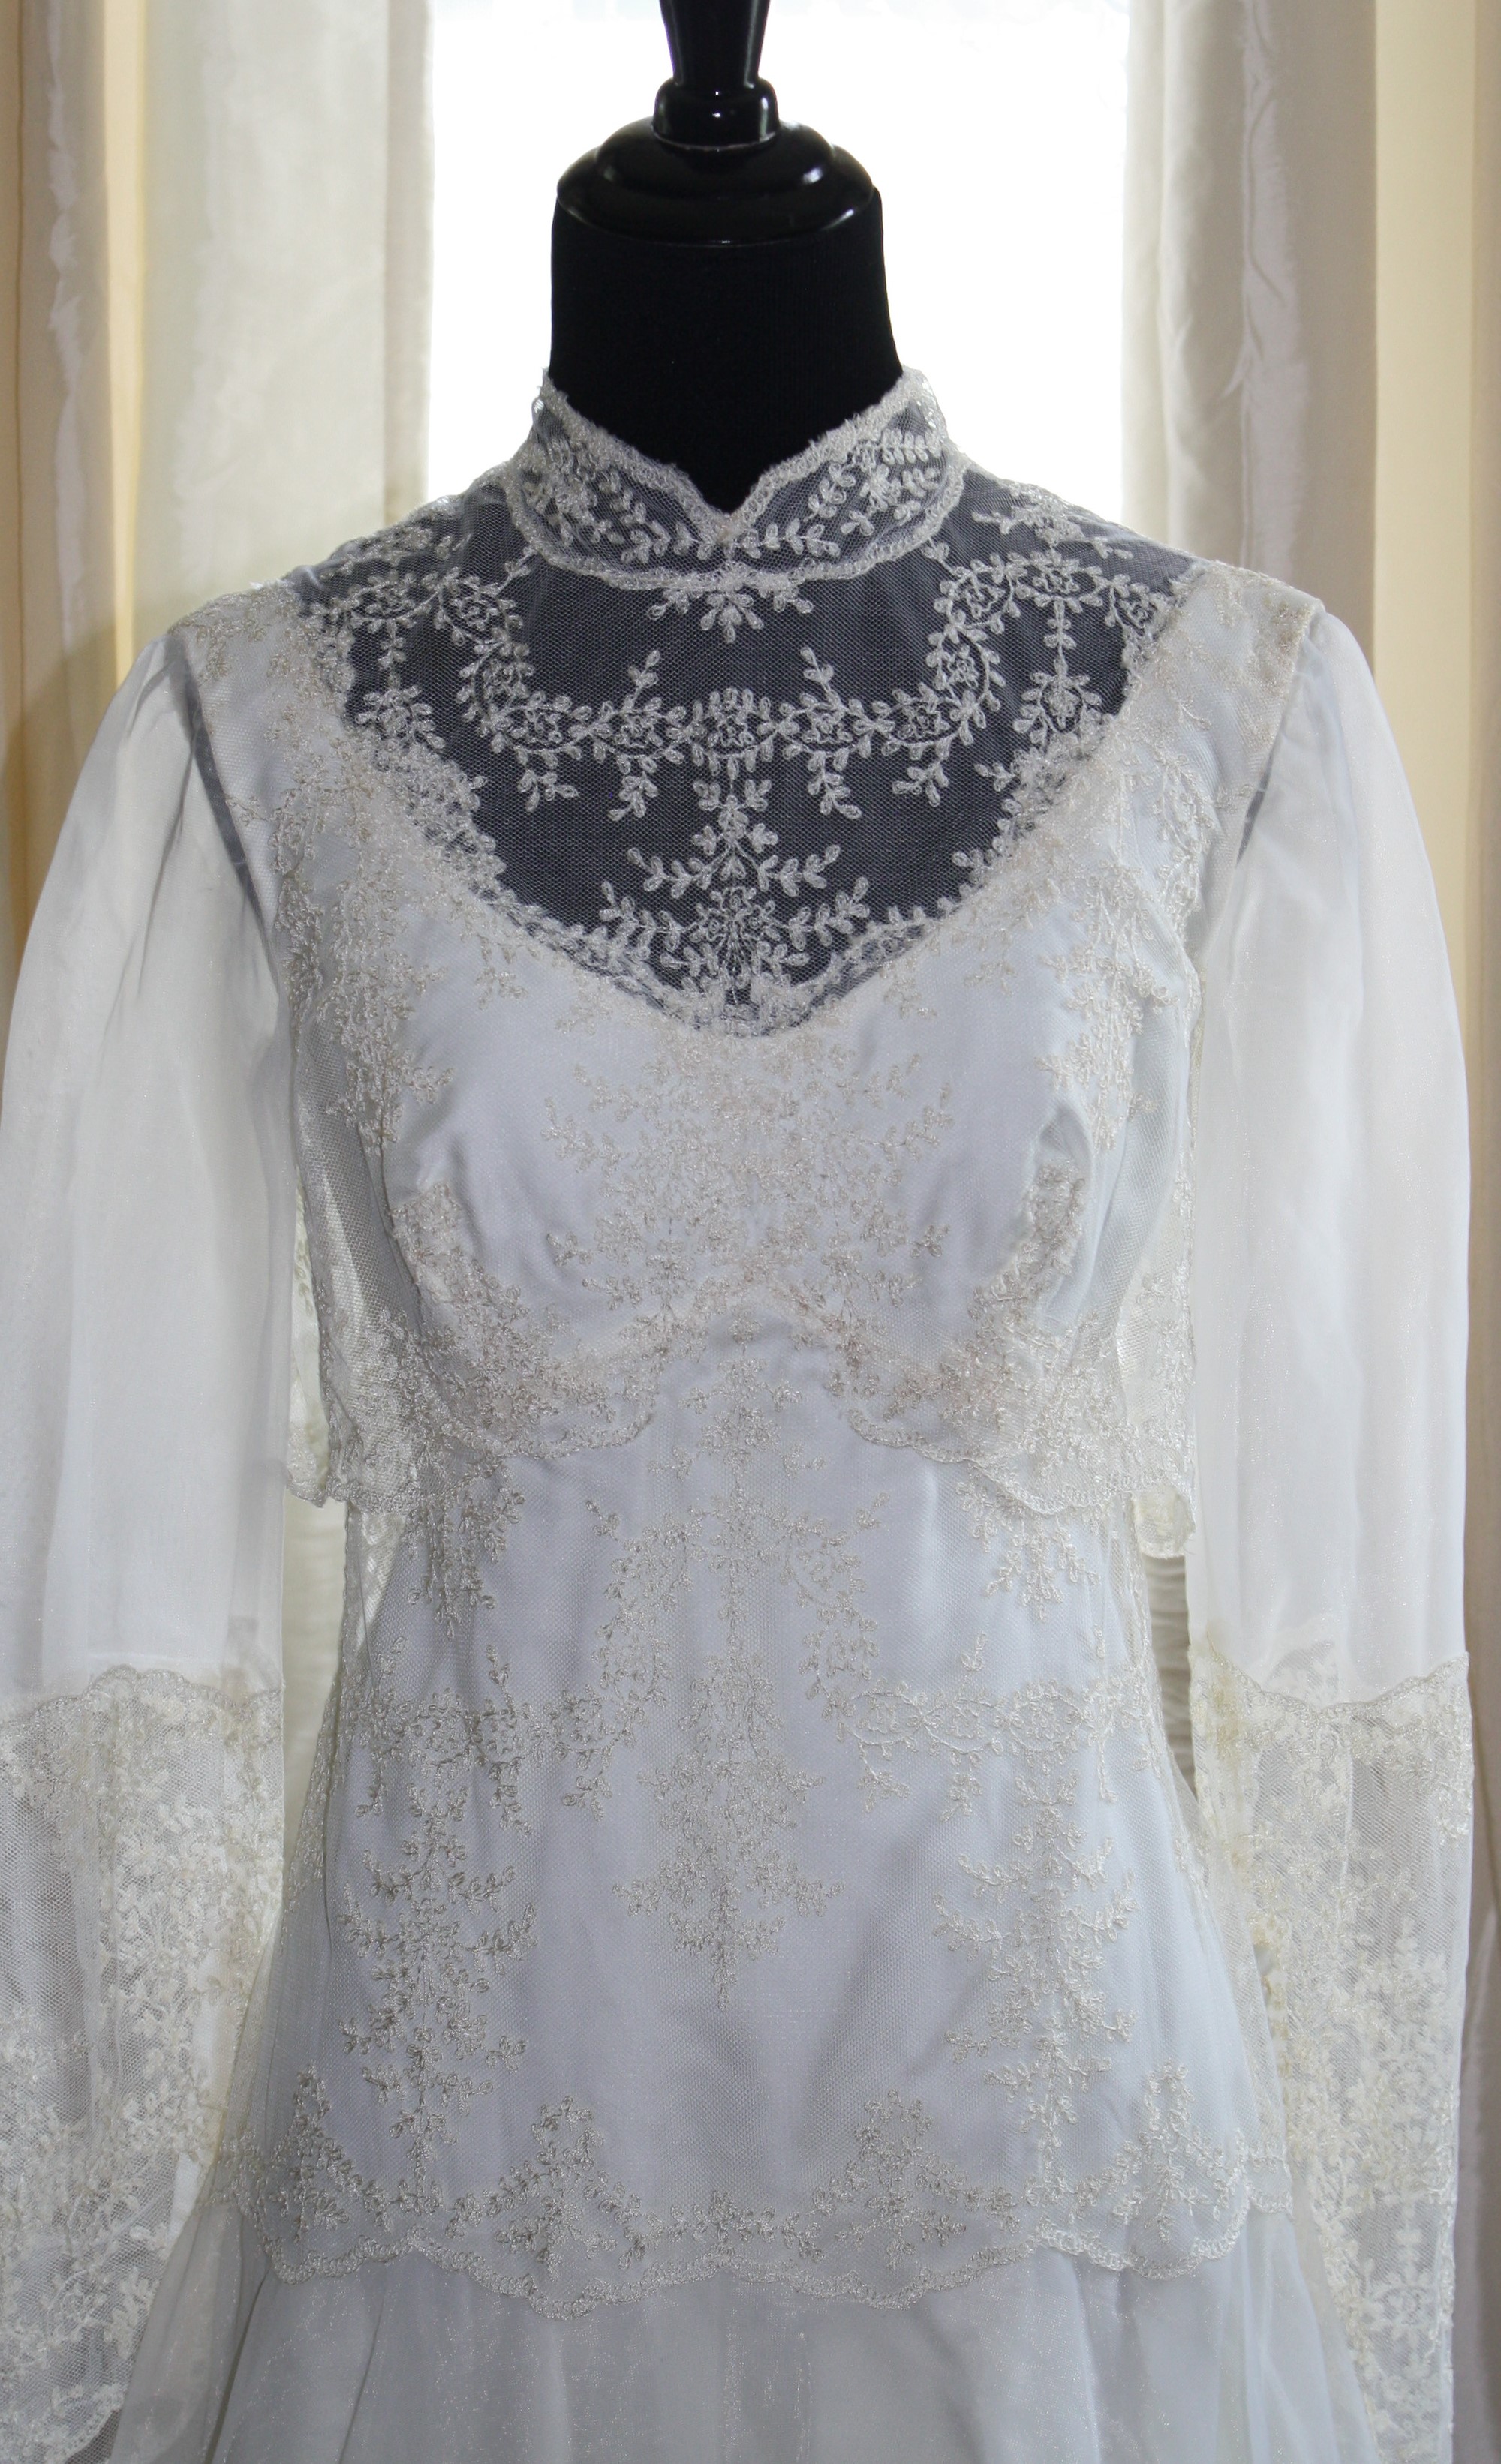 A Vintage Wedding Too's Bridal Gowns - 1970s to 1980s! - A Vintage ...